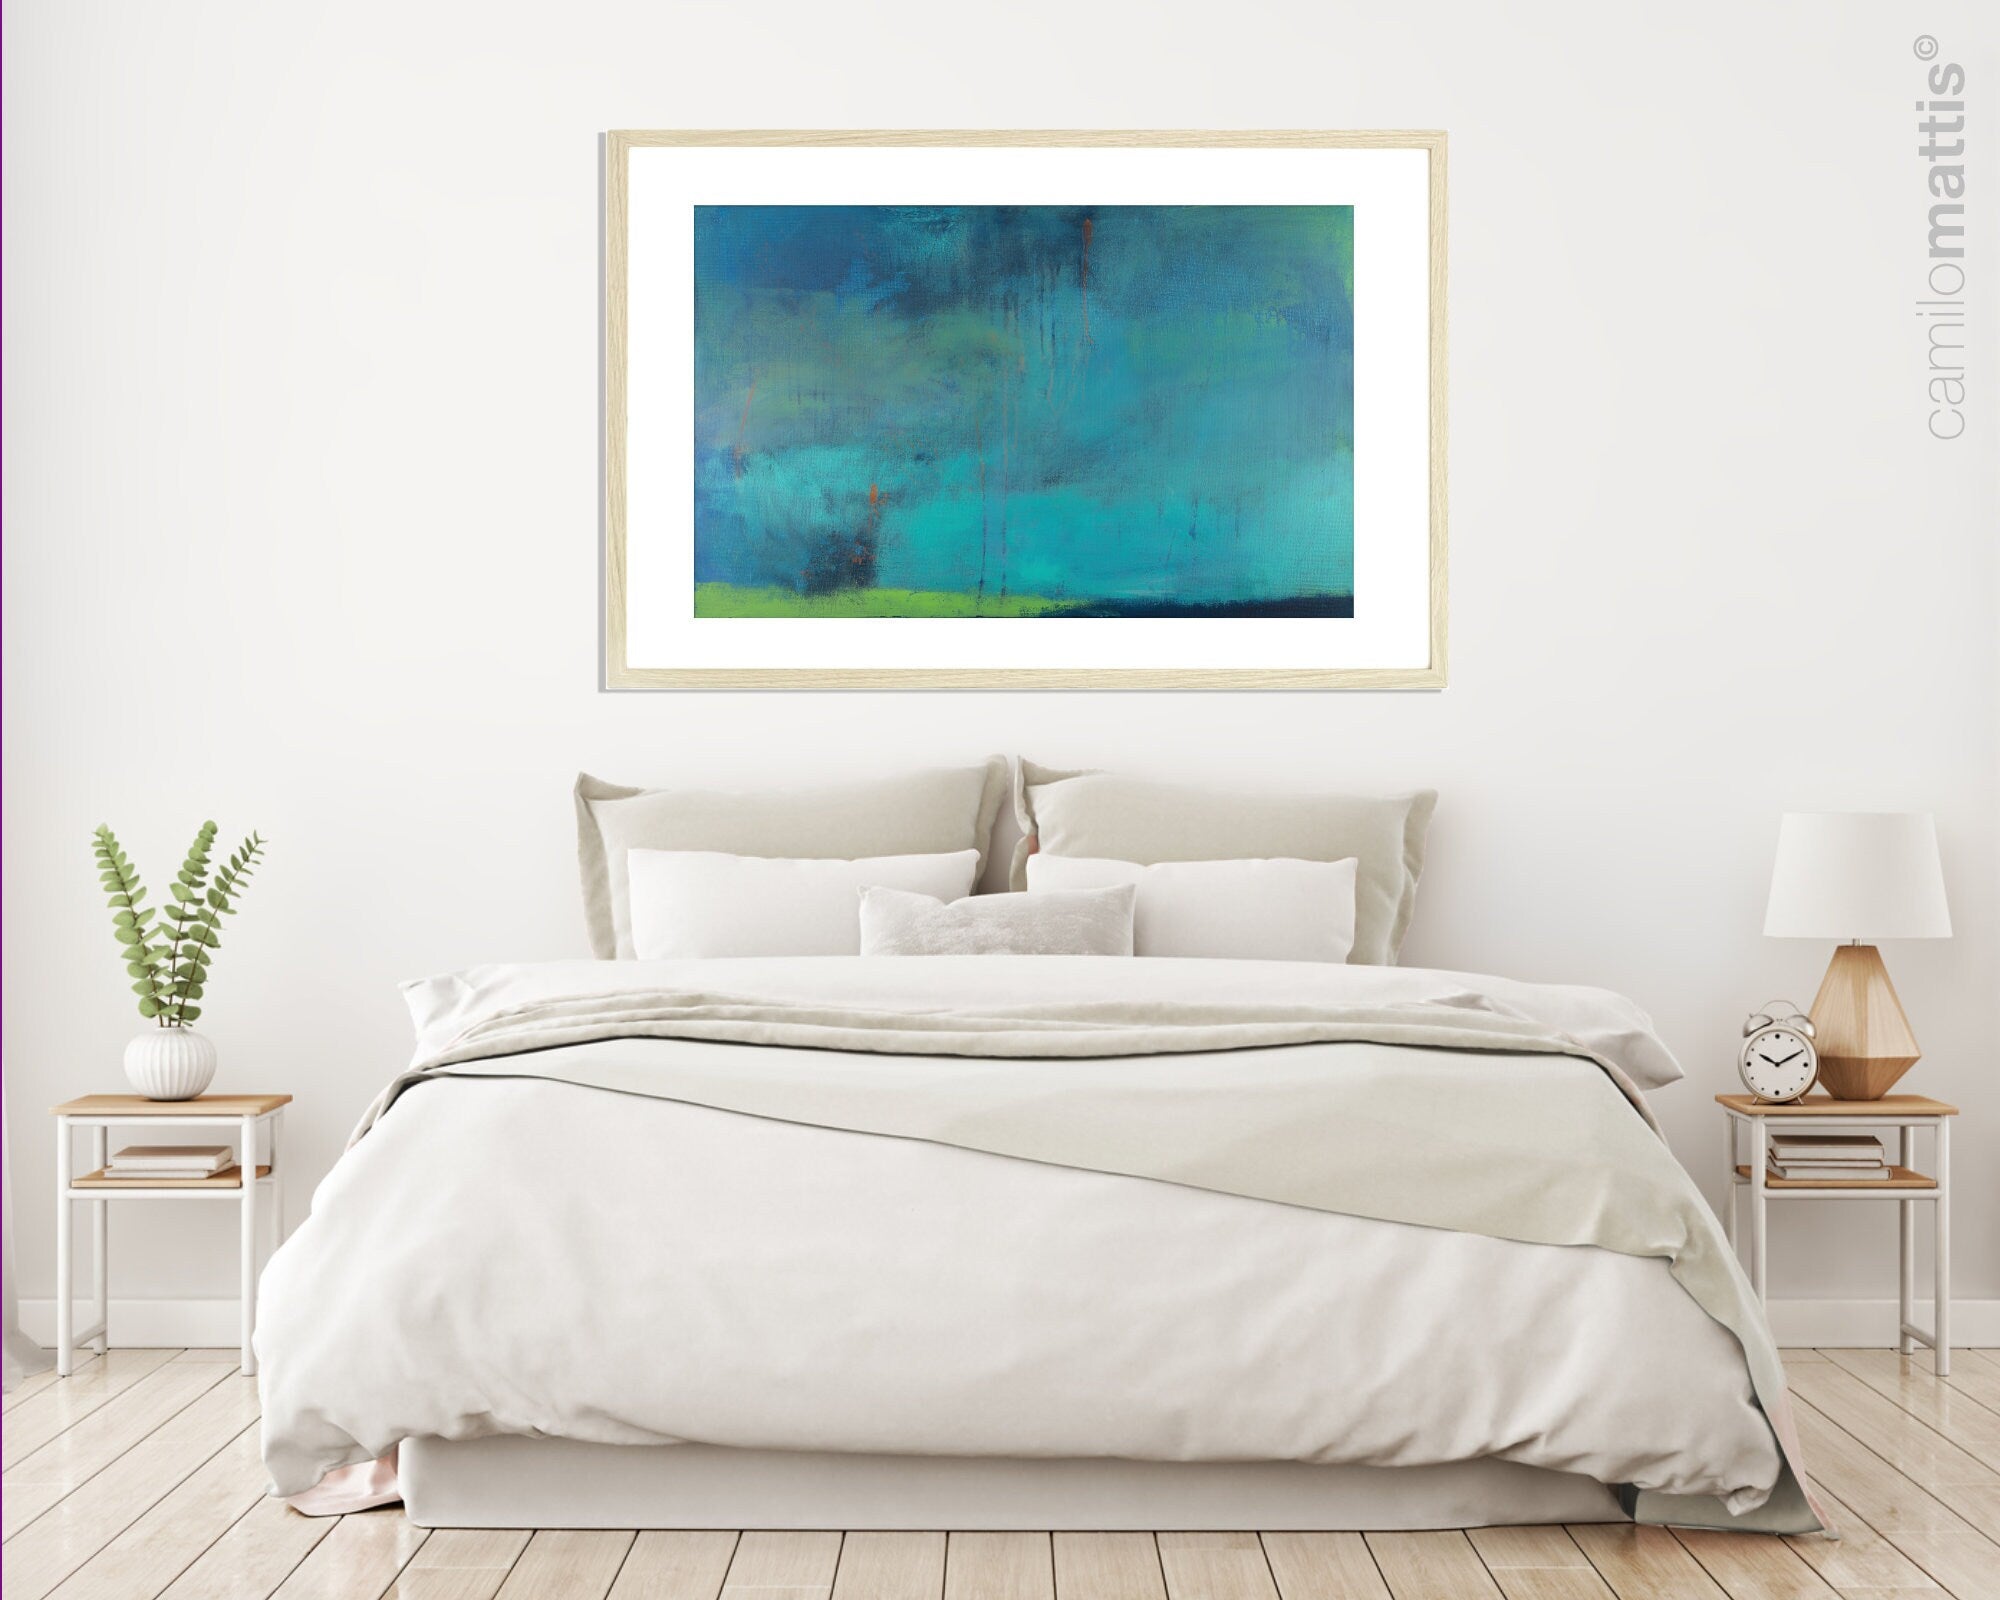 Teal wall art Abstract landscape painting - Art print room decor seascape